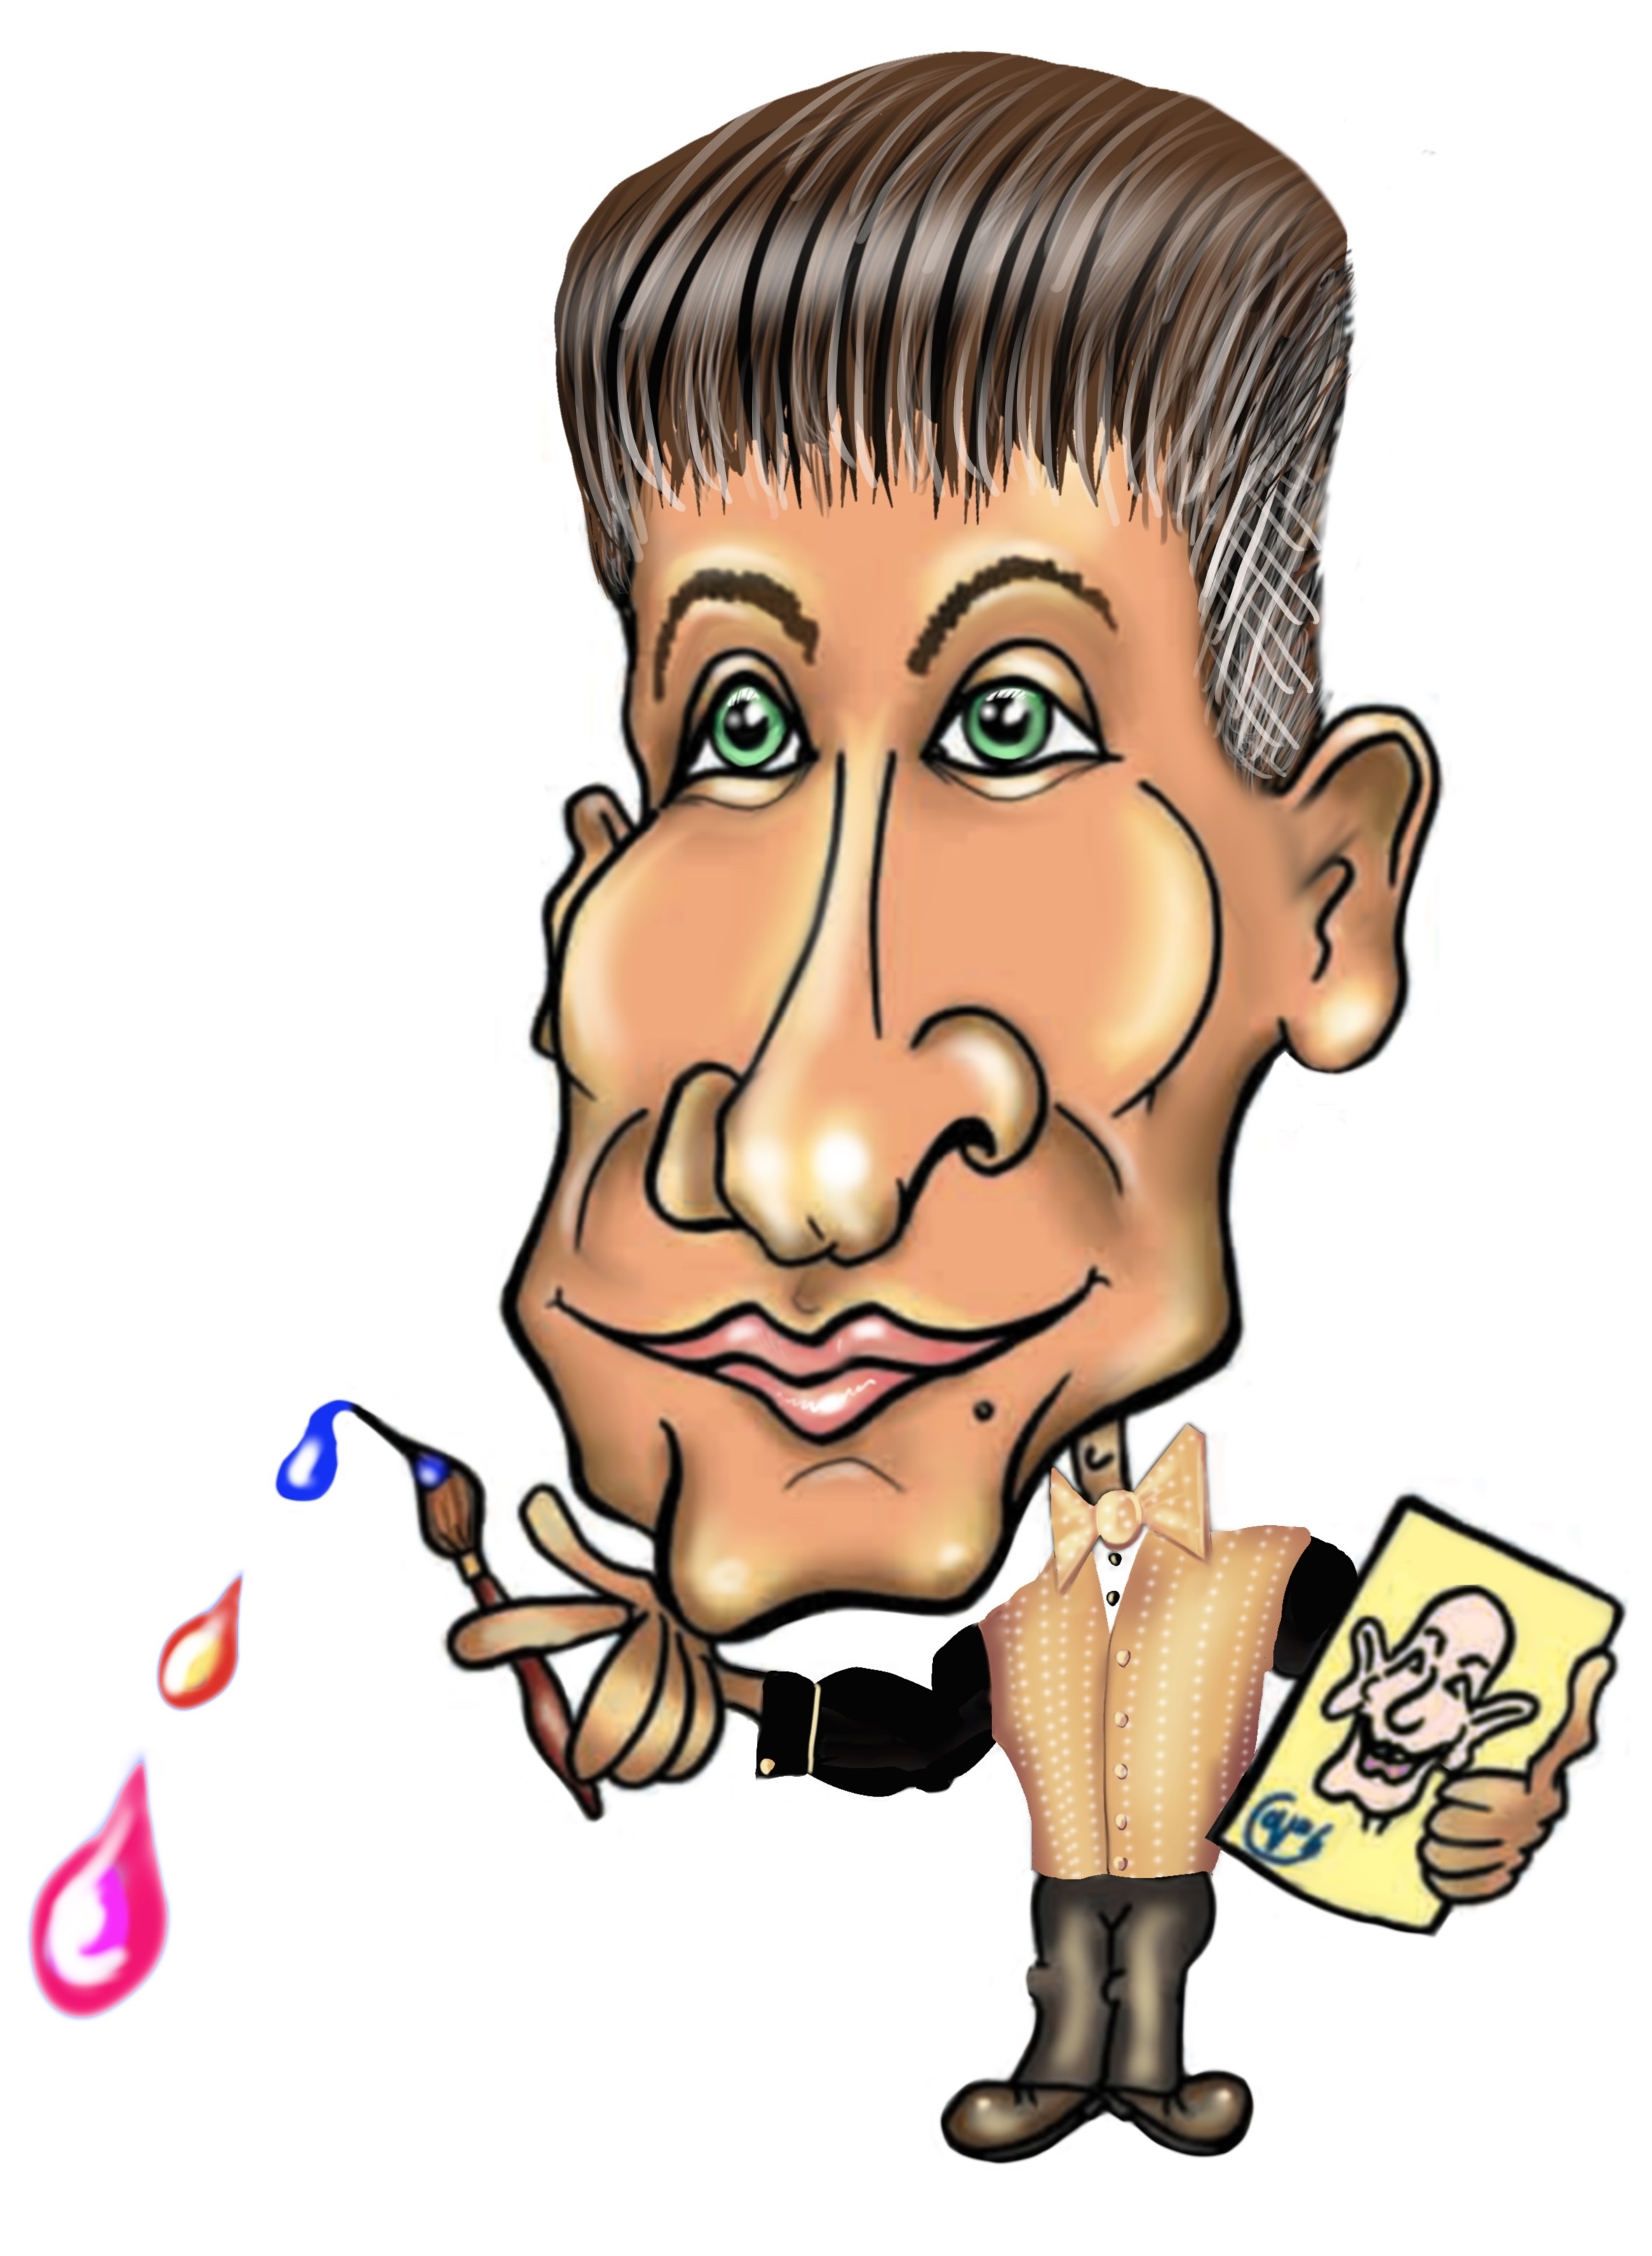 Coley is, The Norfolk Caricature Artist